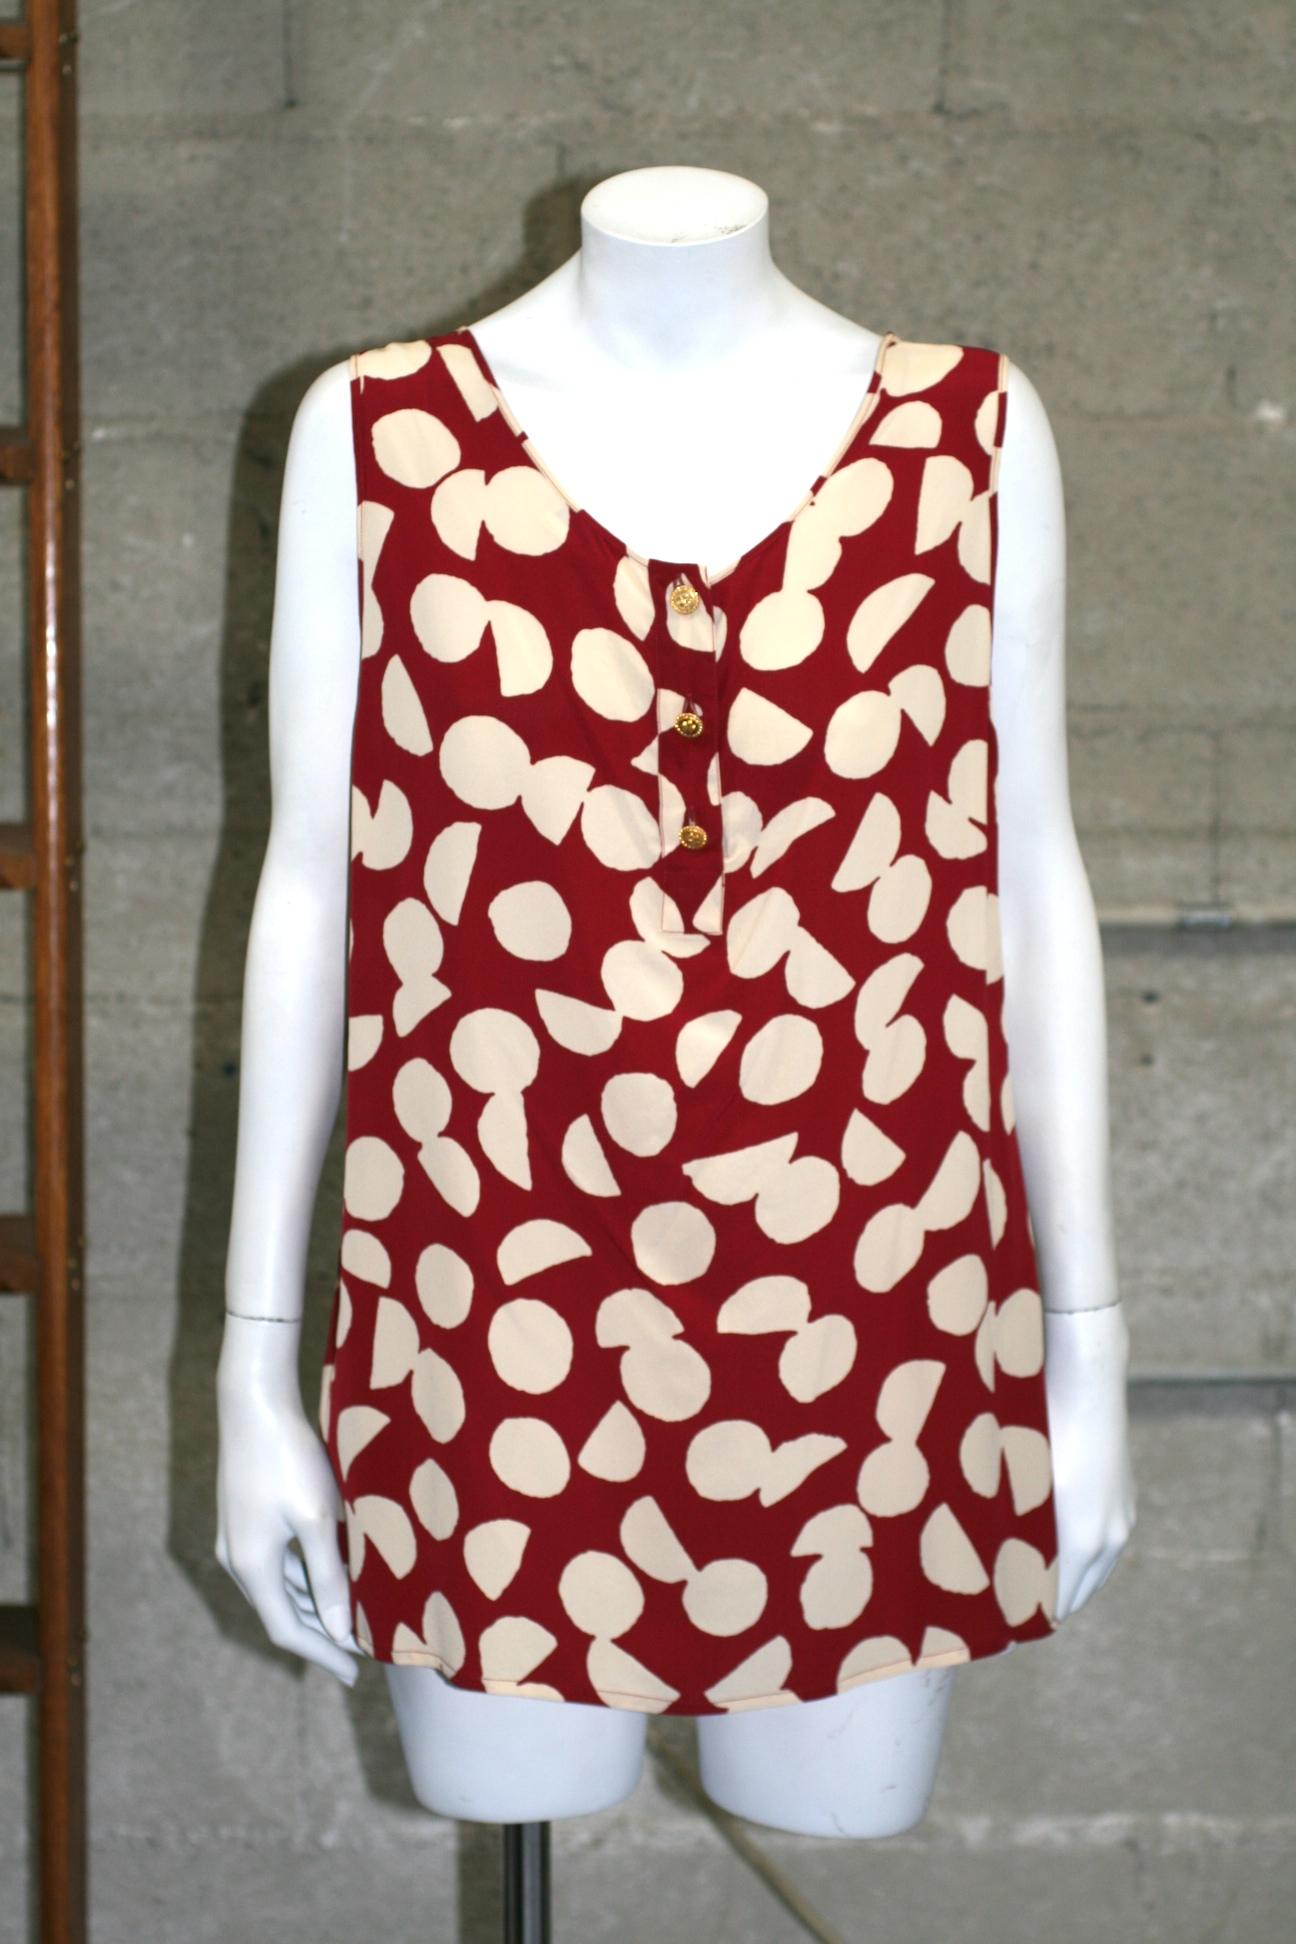 Chanel silk crepe circle printed sleeveless top with gold clover buttons running down the back or front. We have photographed both options. Flared A line shape floats at hip level.
1990's France.
Excellent condition.